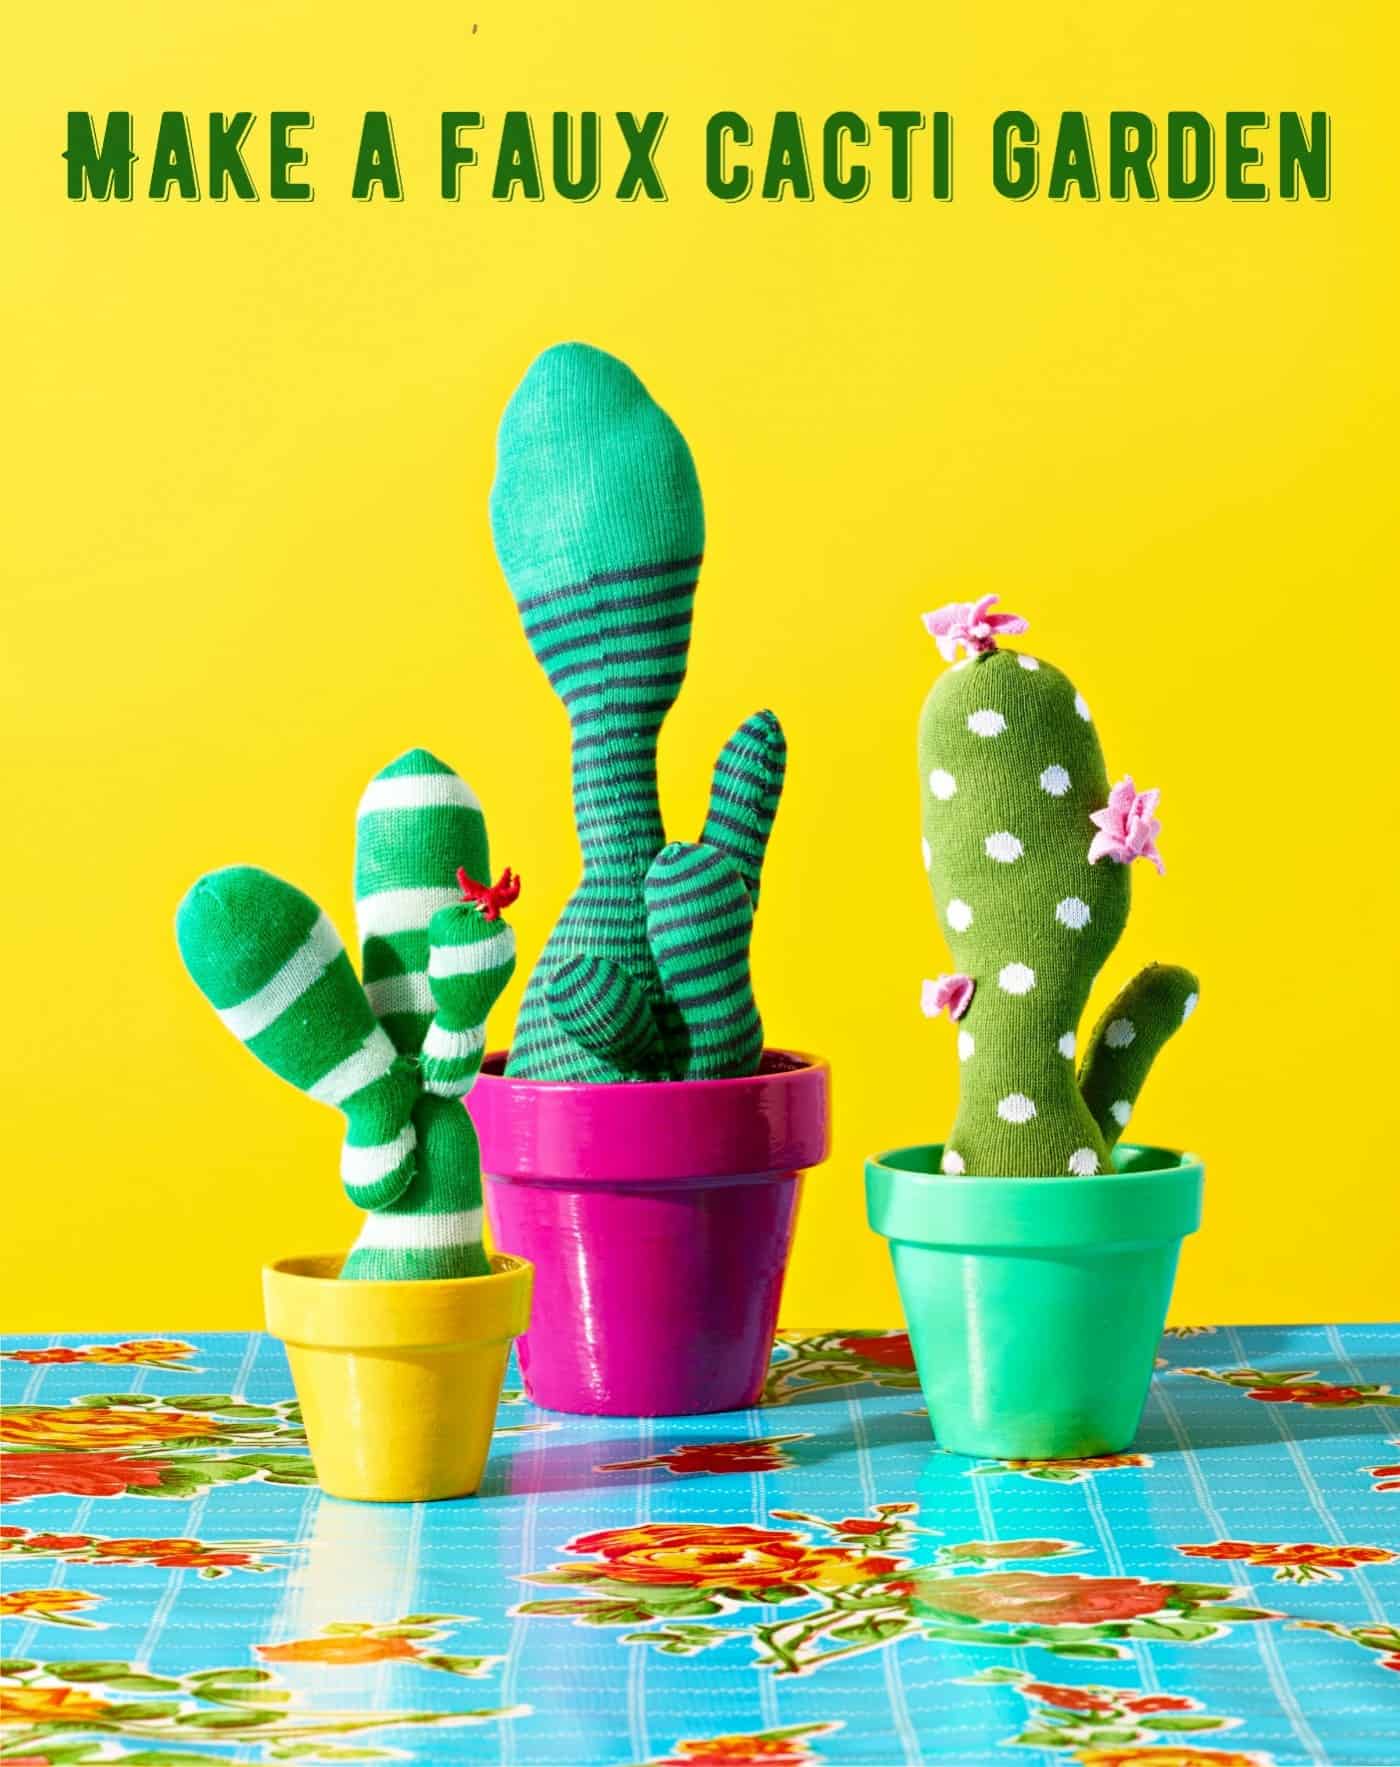 Make Faux Cacti from Socks for Your Quirky Garden